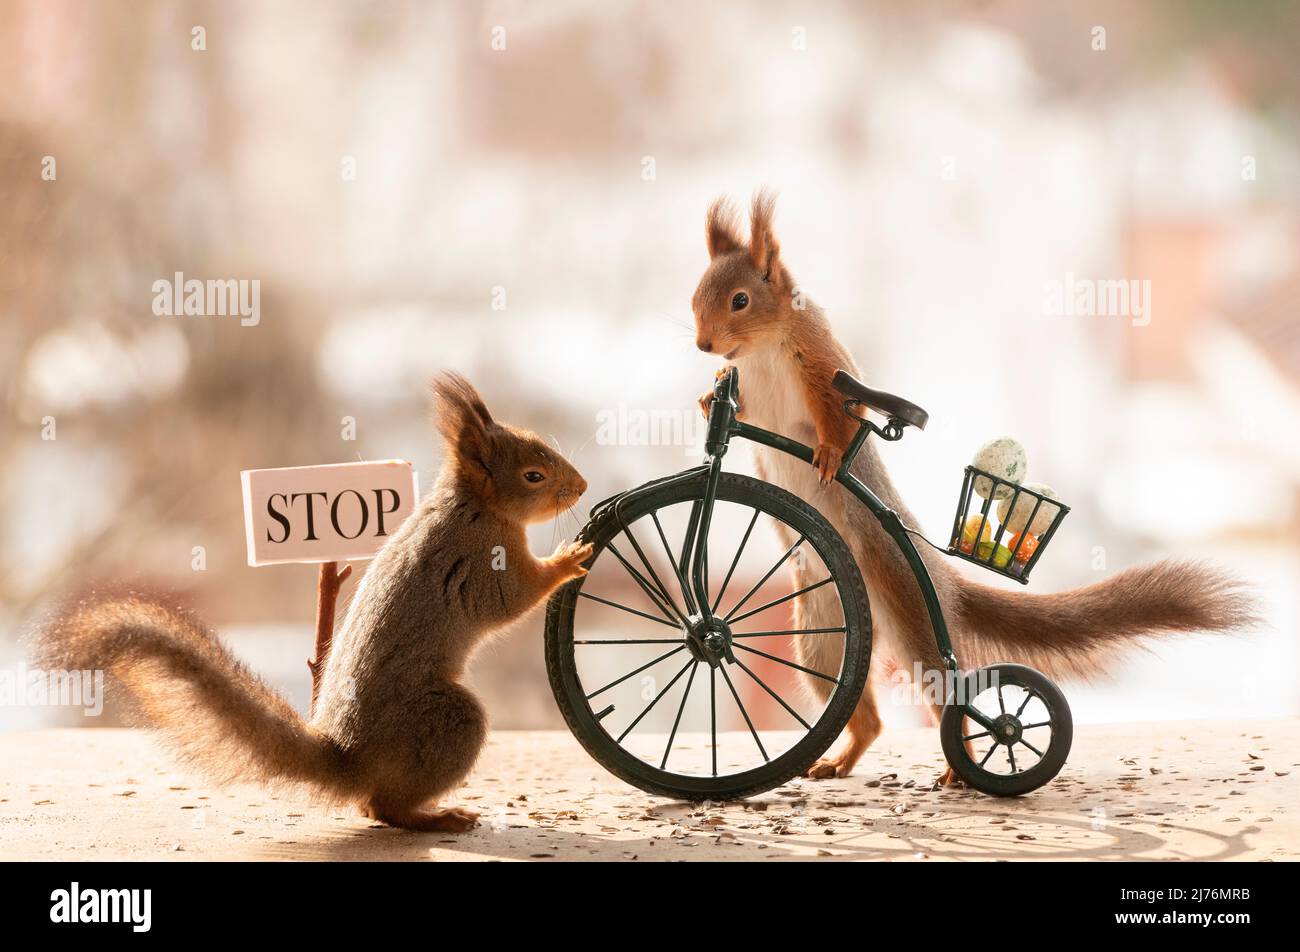 Squirrel with penny-farthing, basket with eggs, sign stop Stock Photo